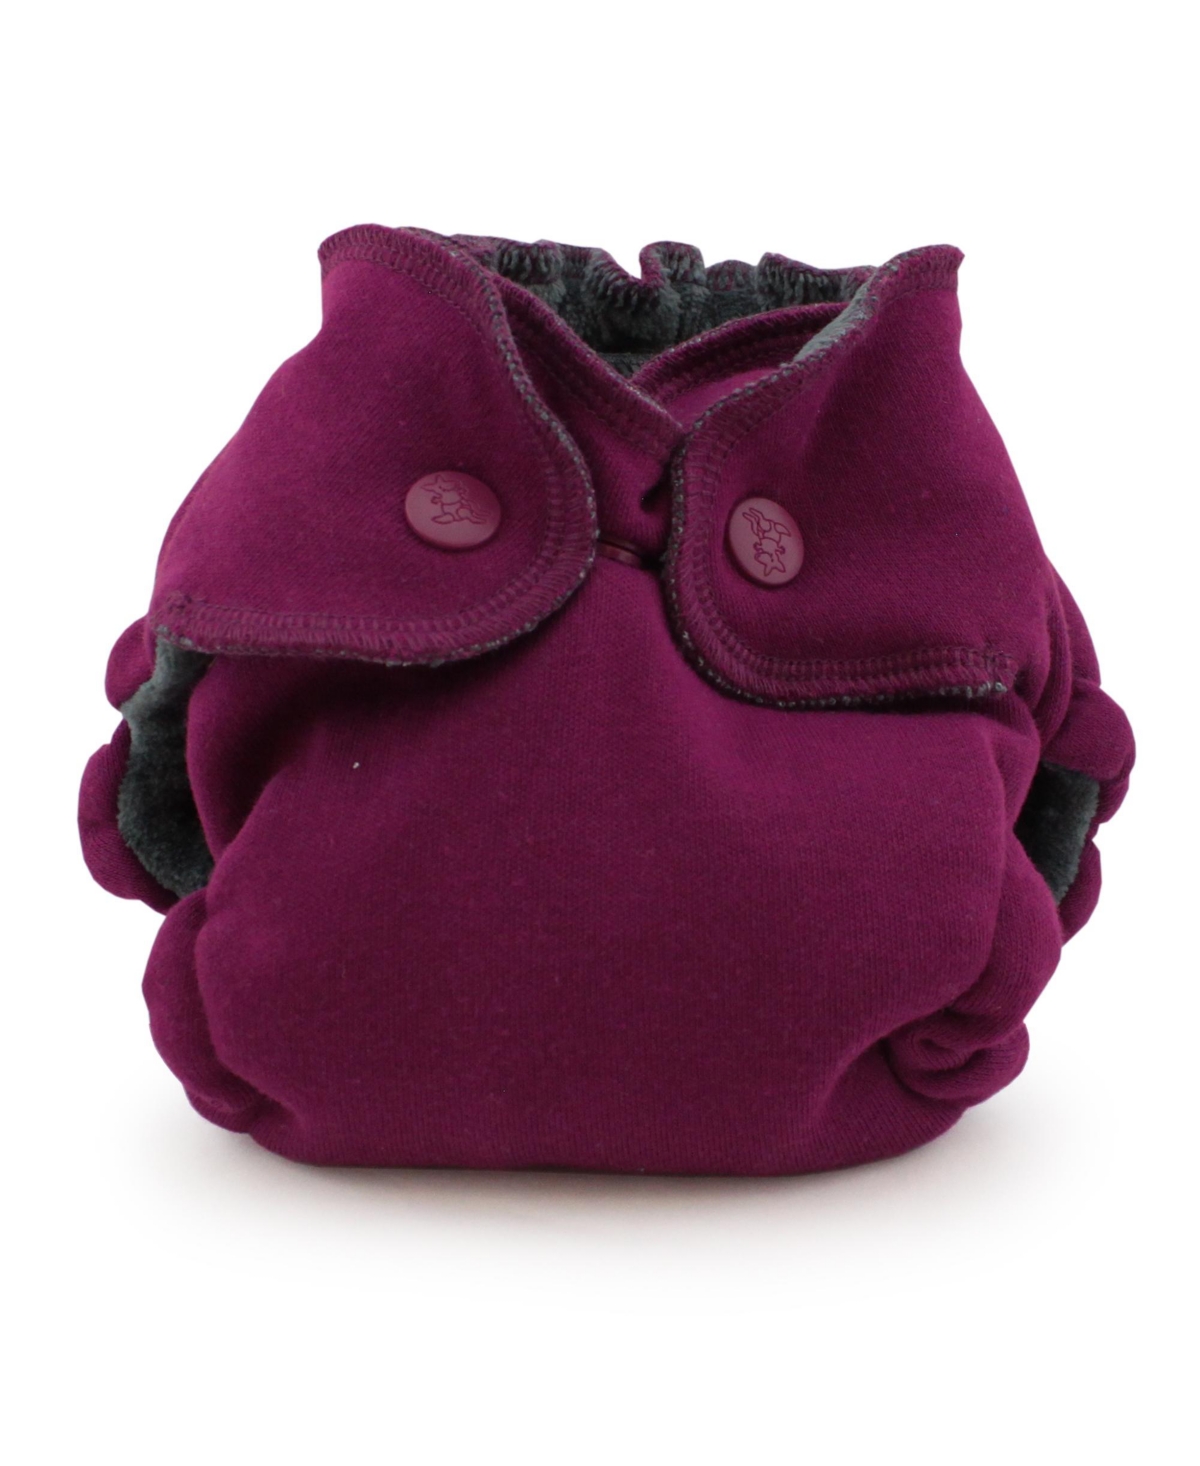 Kanga Care Babies' Ecoposh Obv (organic Rayon From Bamboo Velour) Newborn Aio (all-in-one) Fitted Cloth Diaper In Boysenberry